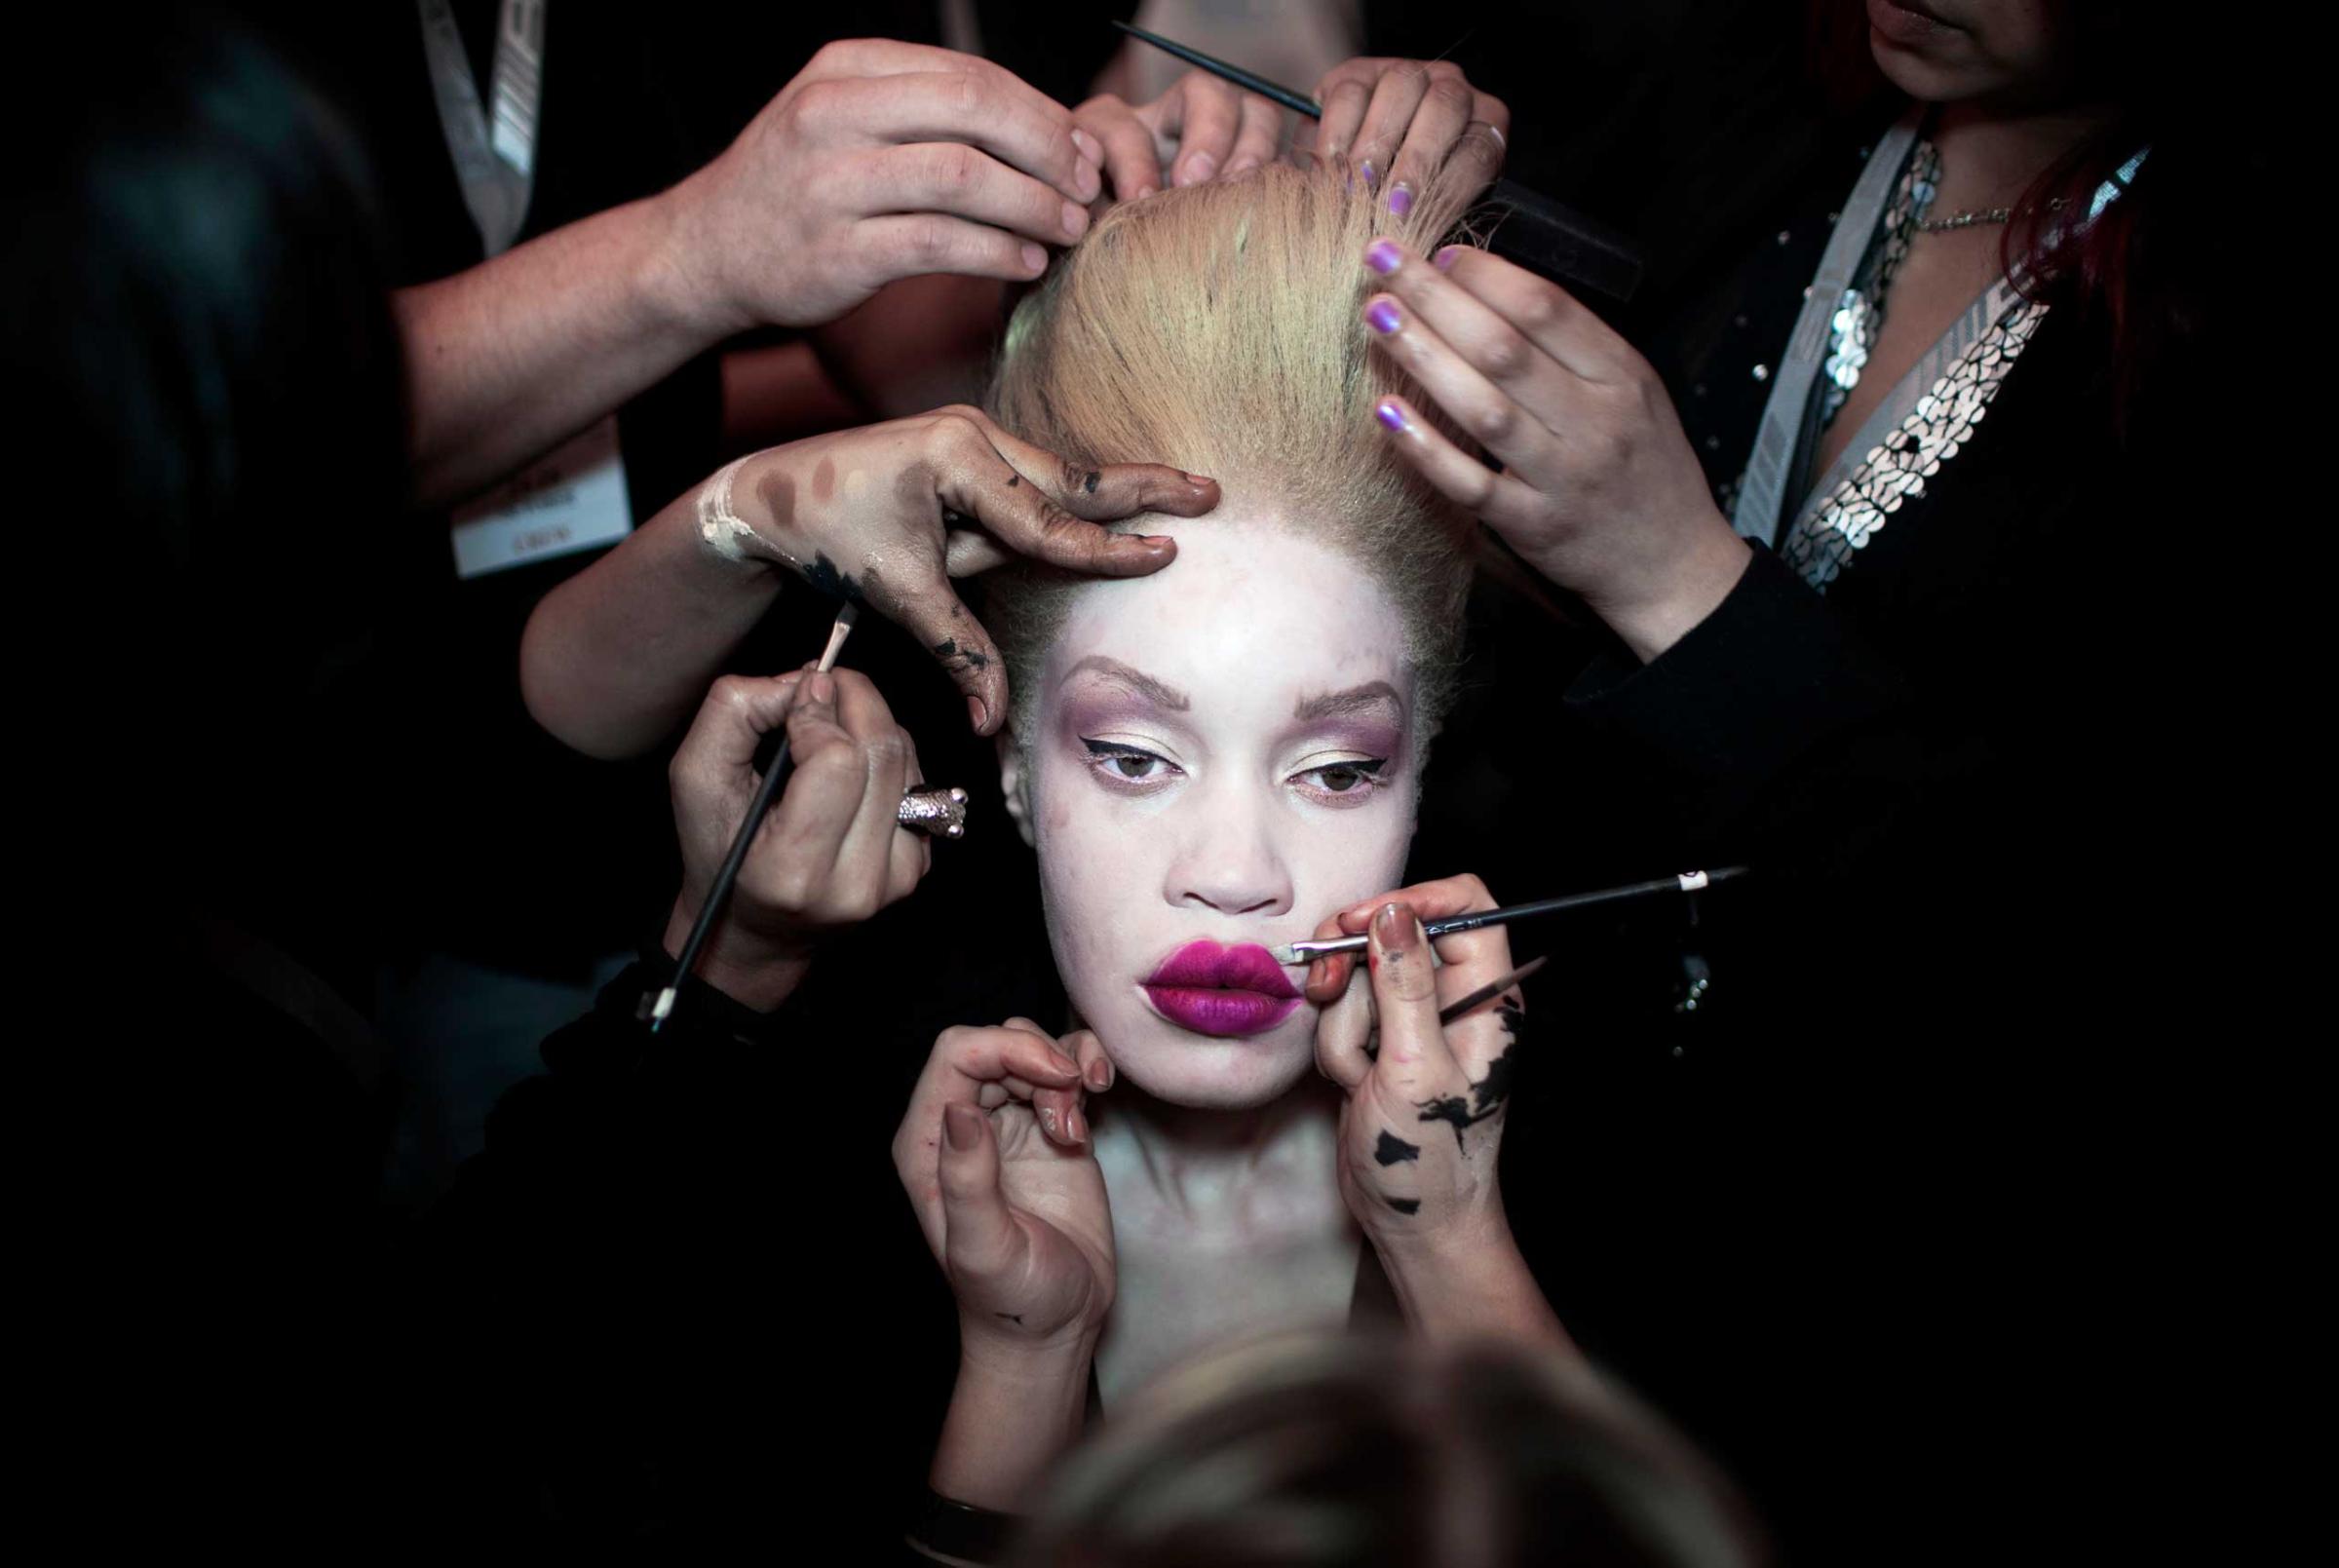 A fashion model has her makeup and hair done backstage before a show at Mercedes Benz Africa fashion week on Oct. 25, 2012 held in Johannesburg, South Africa.